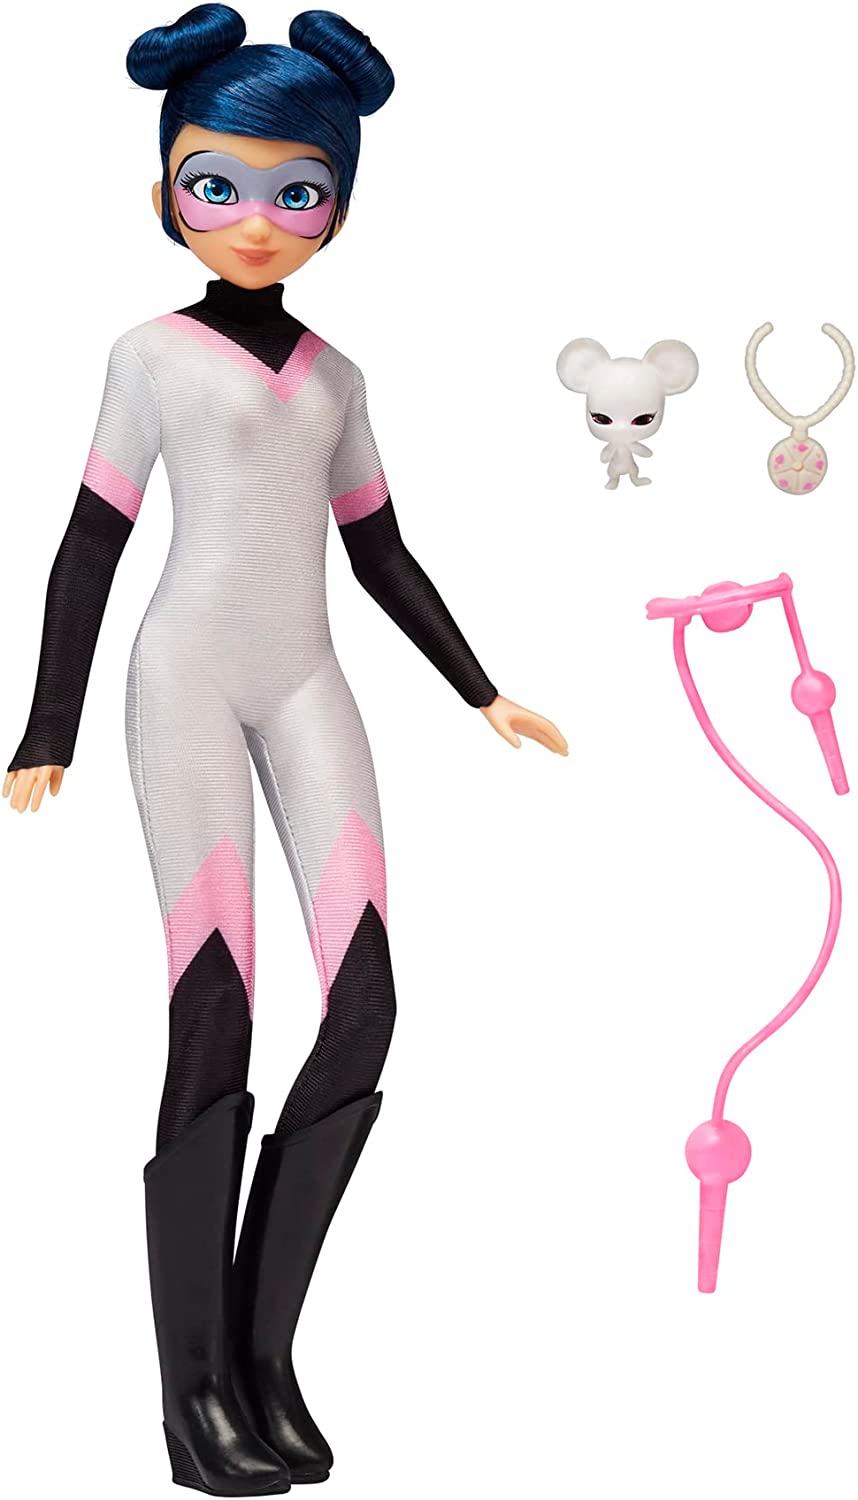 Miraculous Toy Line Arrives in U.S. Next Month - aNb Media, Inc.